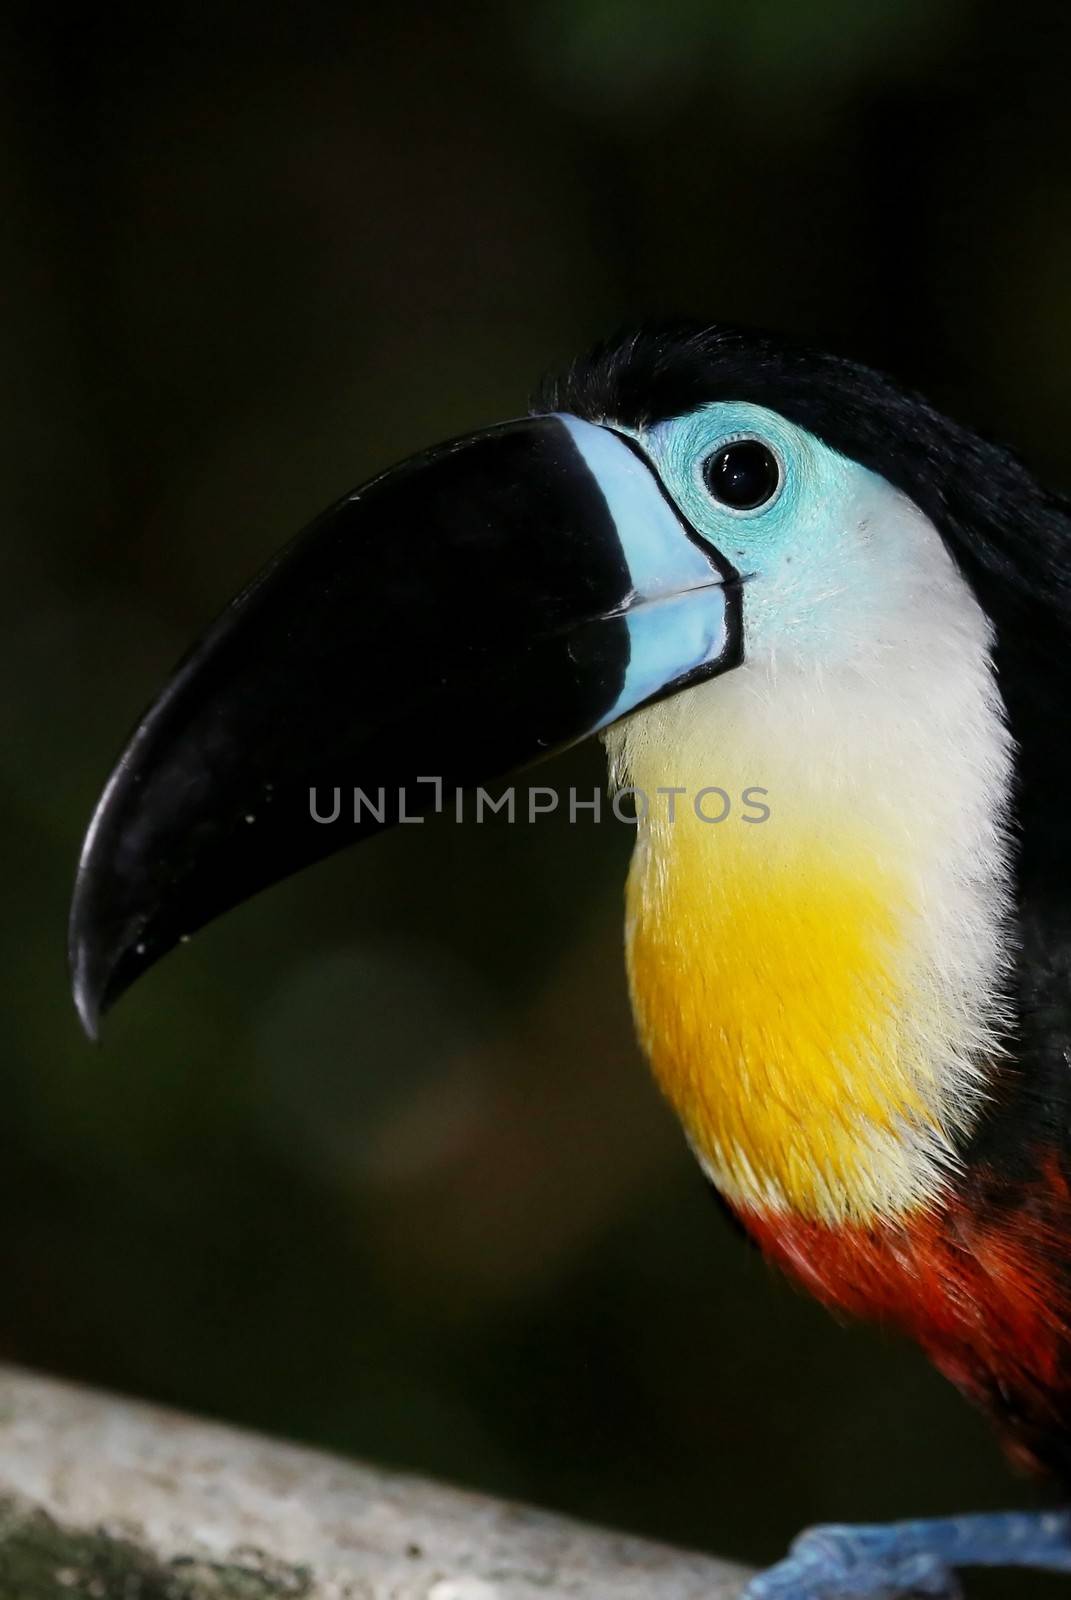 Toucan bird with large beak and colorful feathers